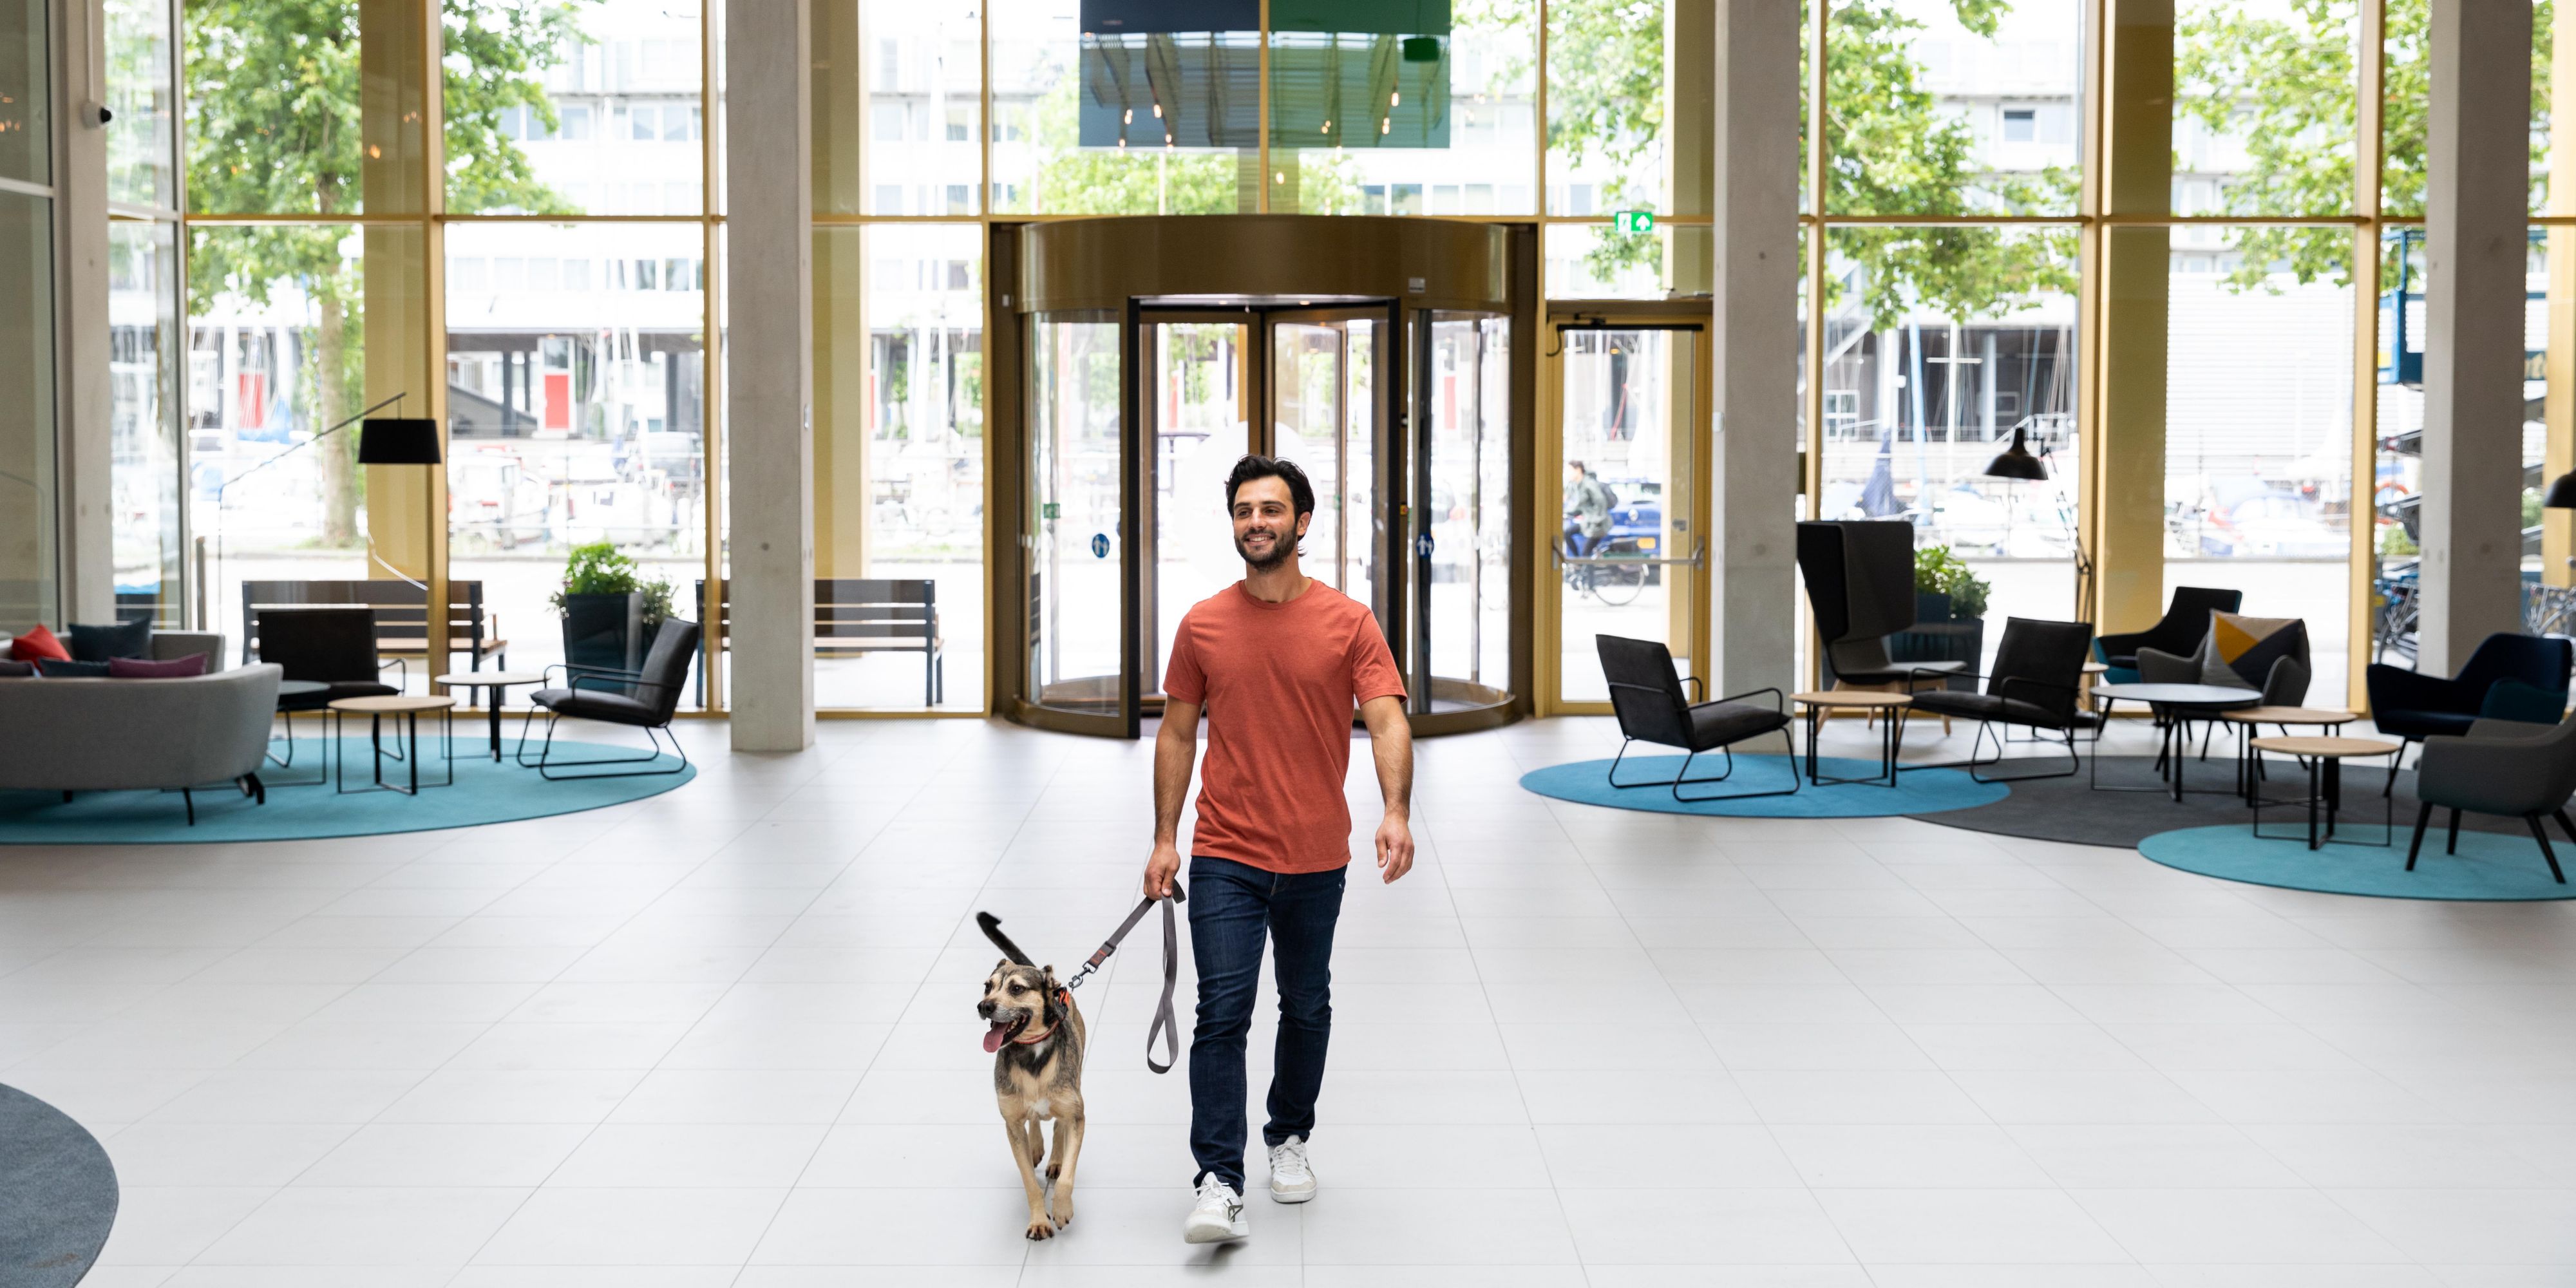 We welcome your pets at Holiday Inn Express Amsterdam - North Riverside for 25€ per night. You and your furry friend will feel at home in our comfortable hotel rooms. We offer a designated pet walking area and a restaurant with a pet-friendly outdoor dining area. Add a pet reservation when you book your stay.